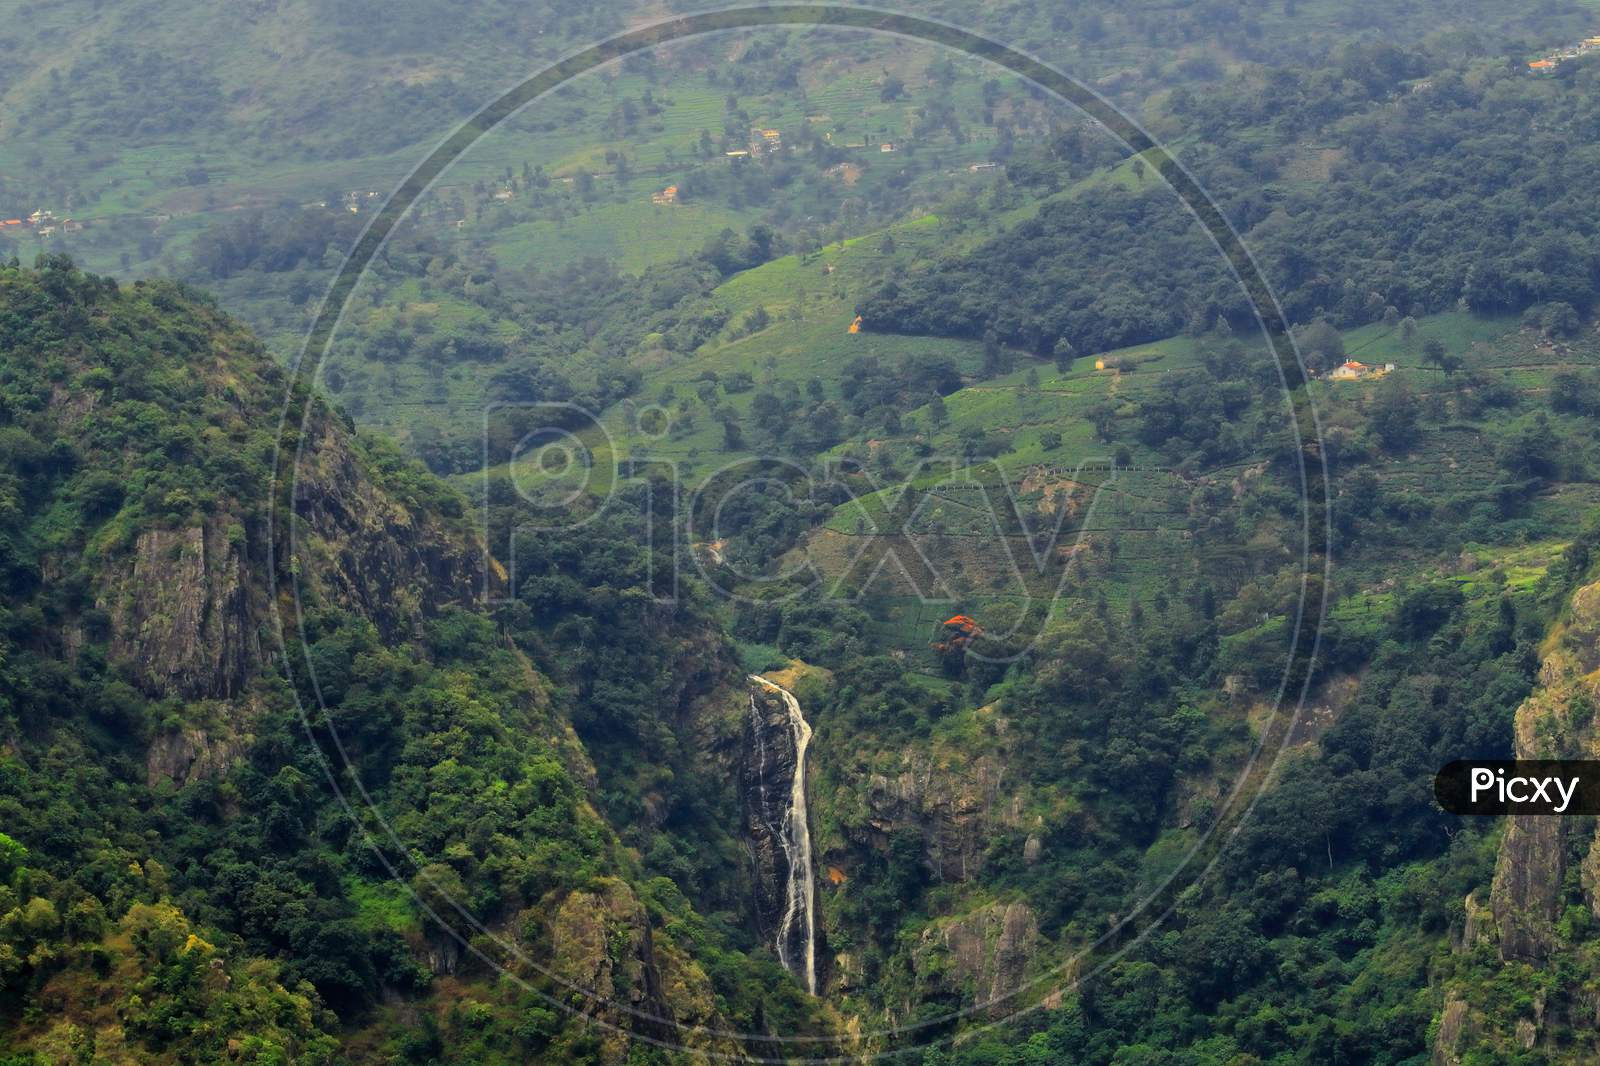 panoramic view of catherine waterfalls from dolphin nose view point at coonoor, near famous ooty hill station. coonoor located at the nilgiri foothills in tamilnadu, south india